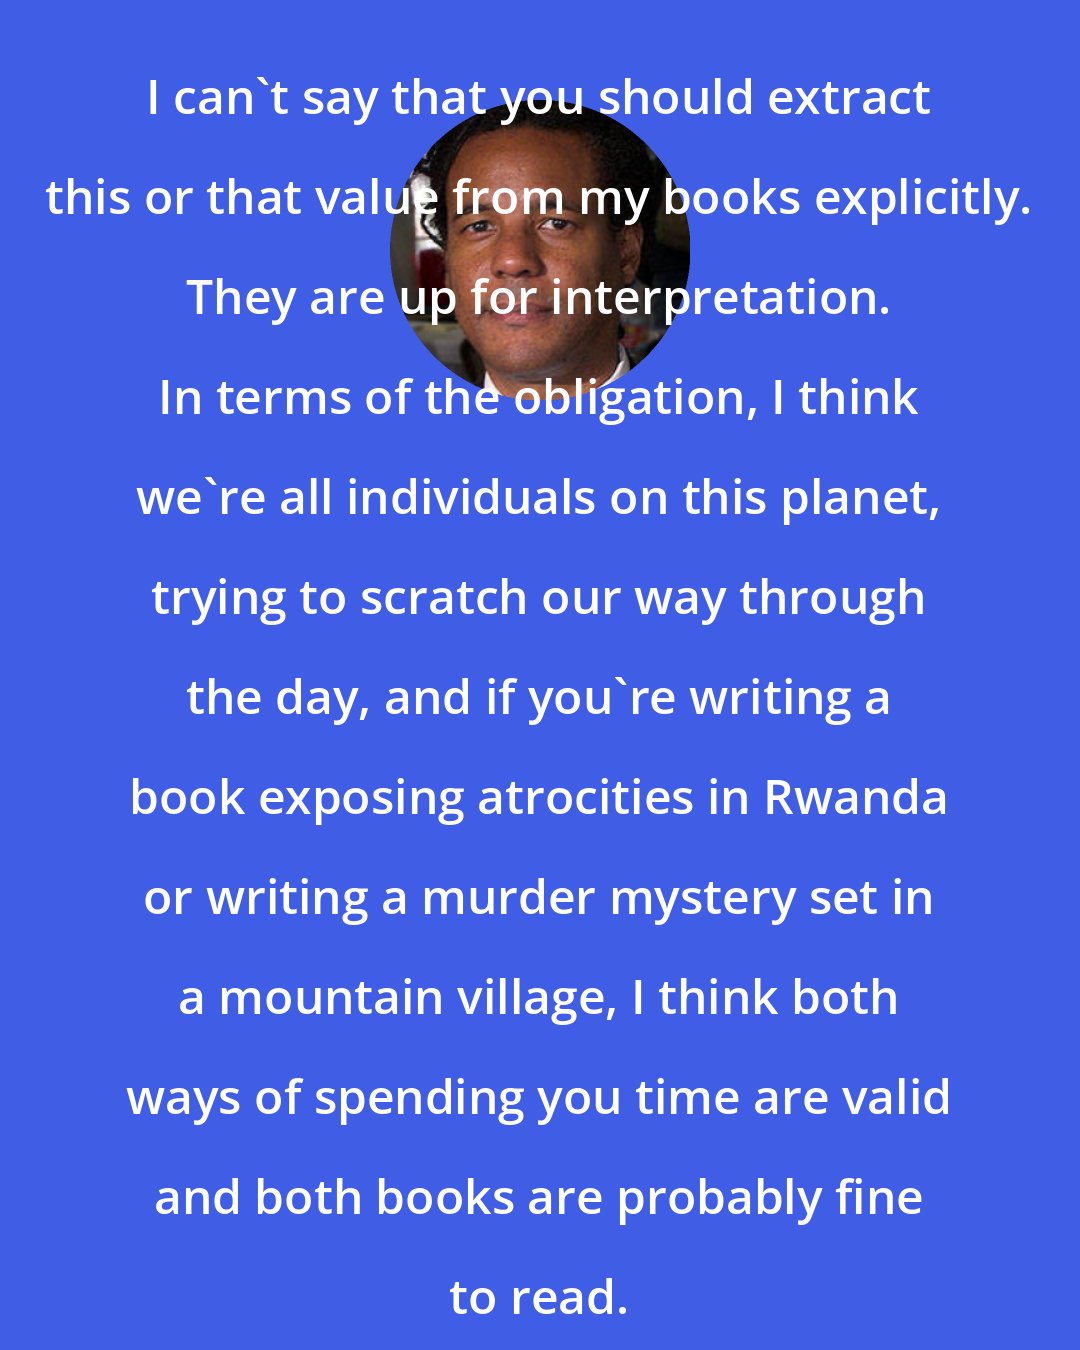 Colson Whitehead: I can't say that you should extract this or that value from my books explicitly. They are up for interpretation. In terms of the obligation, I think we're all individuals on this planet, trying to scratch our way through the day, and if you're writing a book exposing atrocities in Rwanda or writing a murder mystery set in a mountain village, I think both ways of spending you time are valid and both books are probably fine to read.